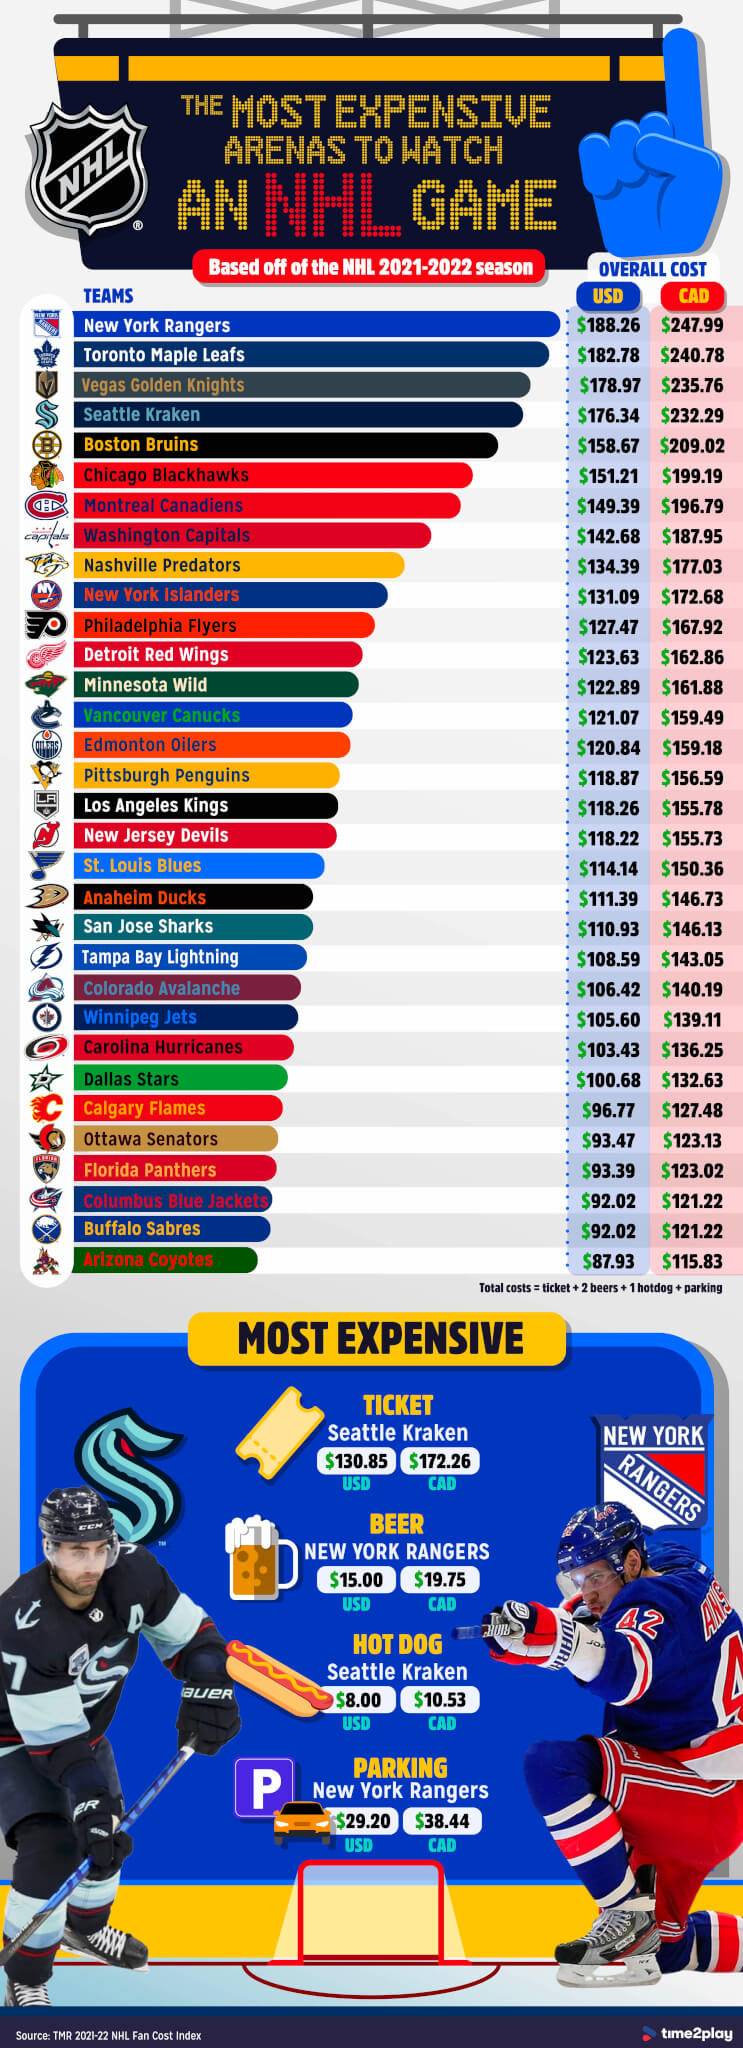 The most expensive arenas to watch an NHL game